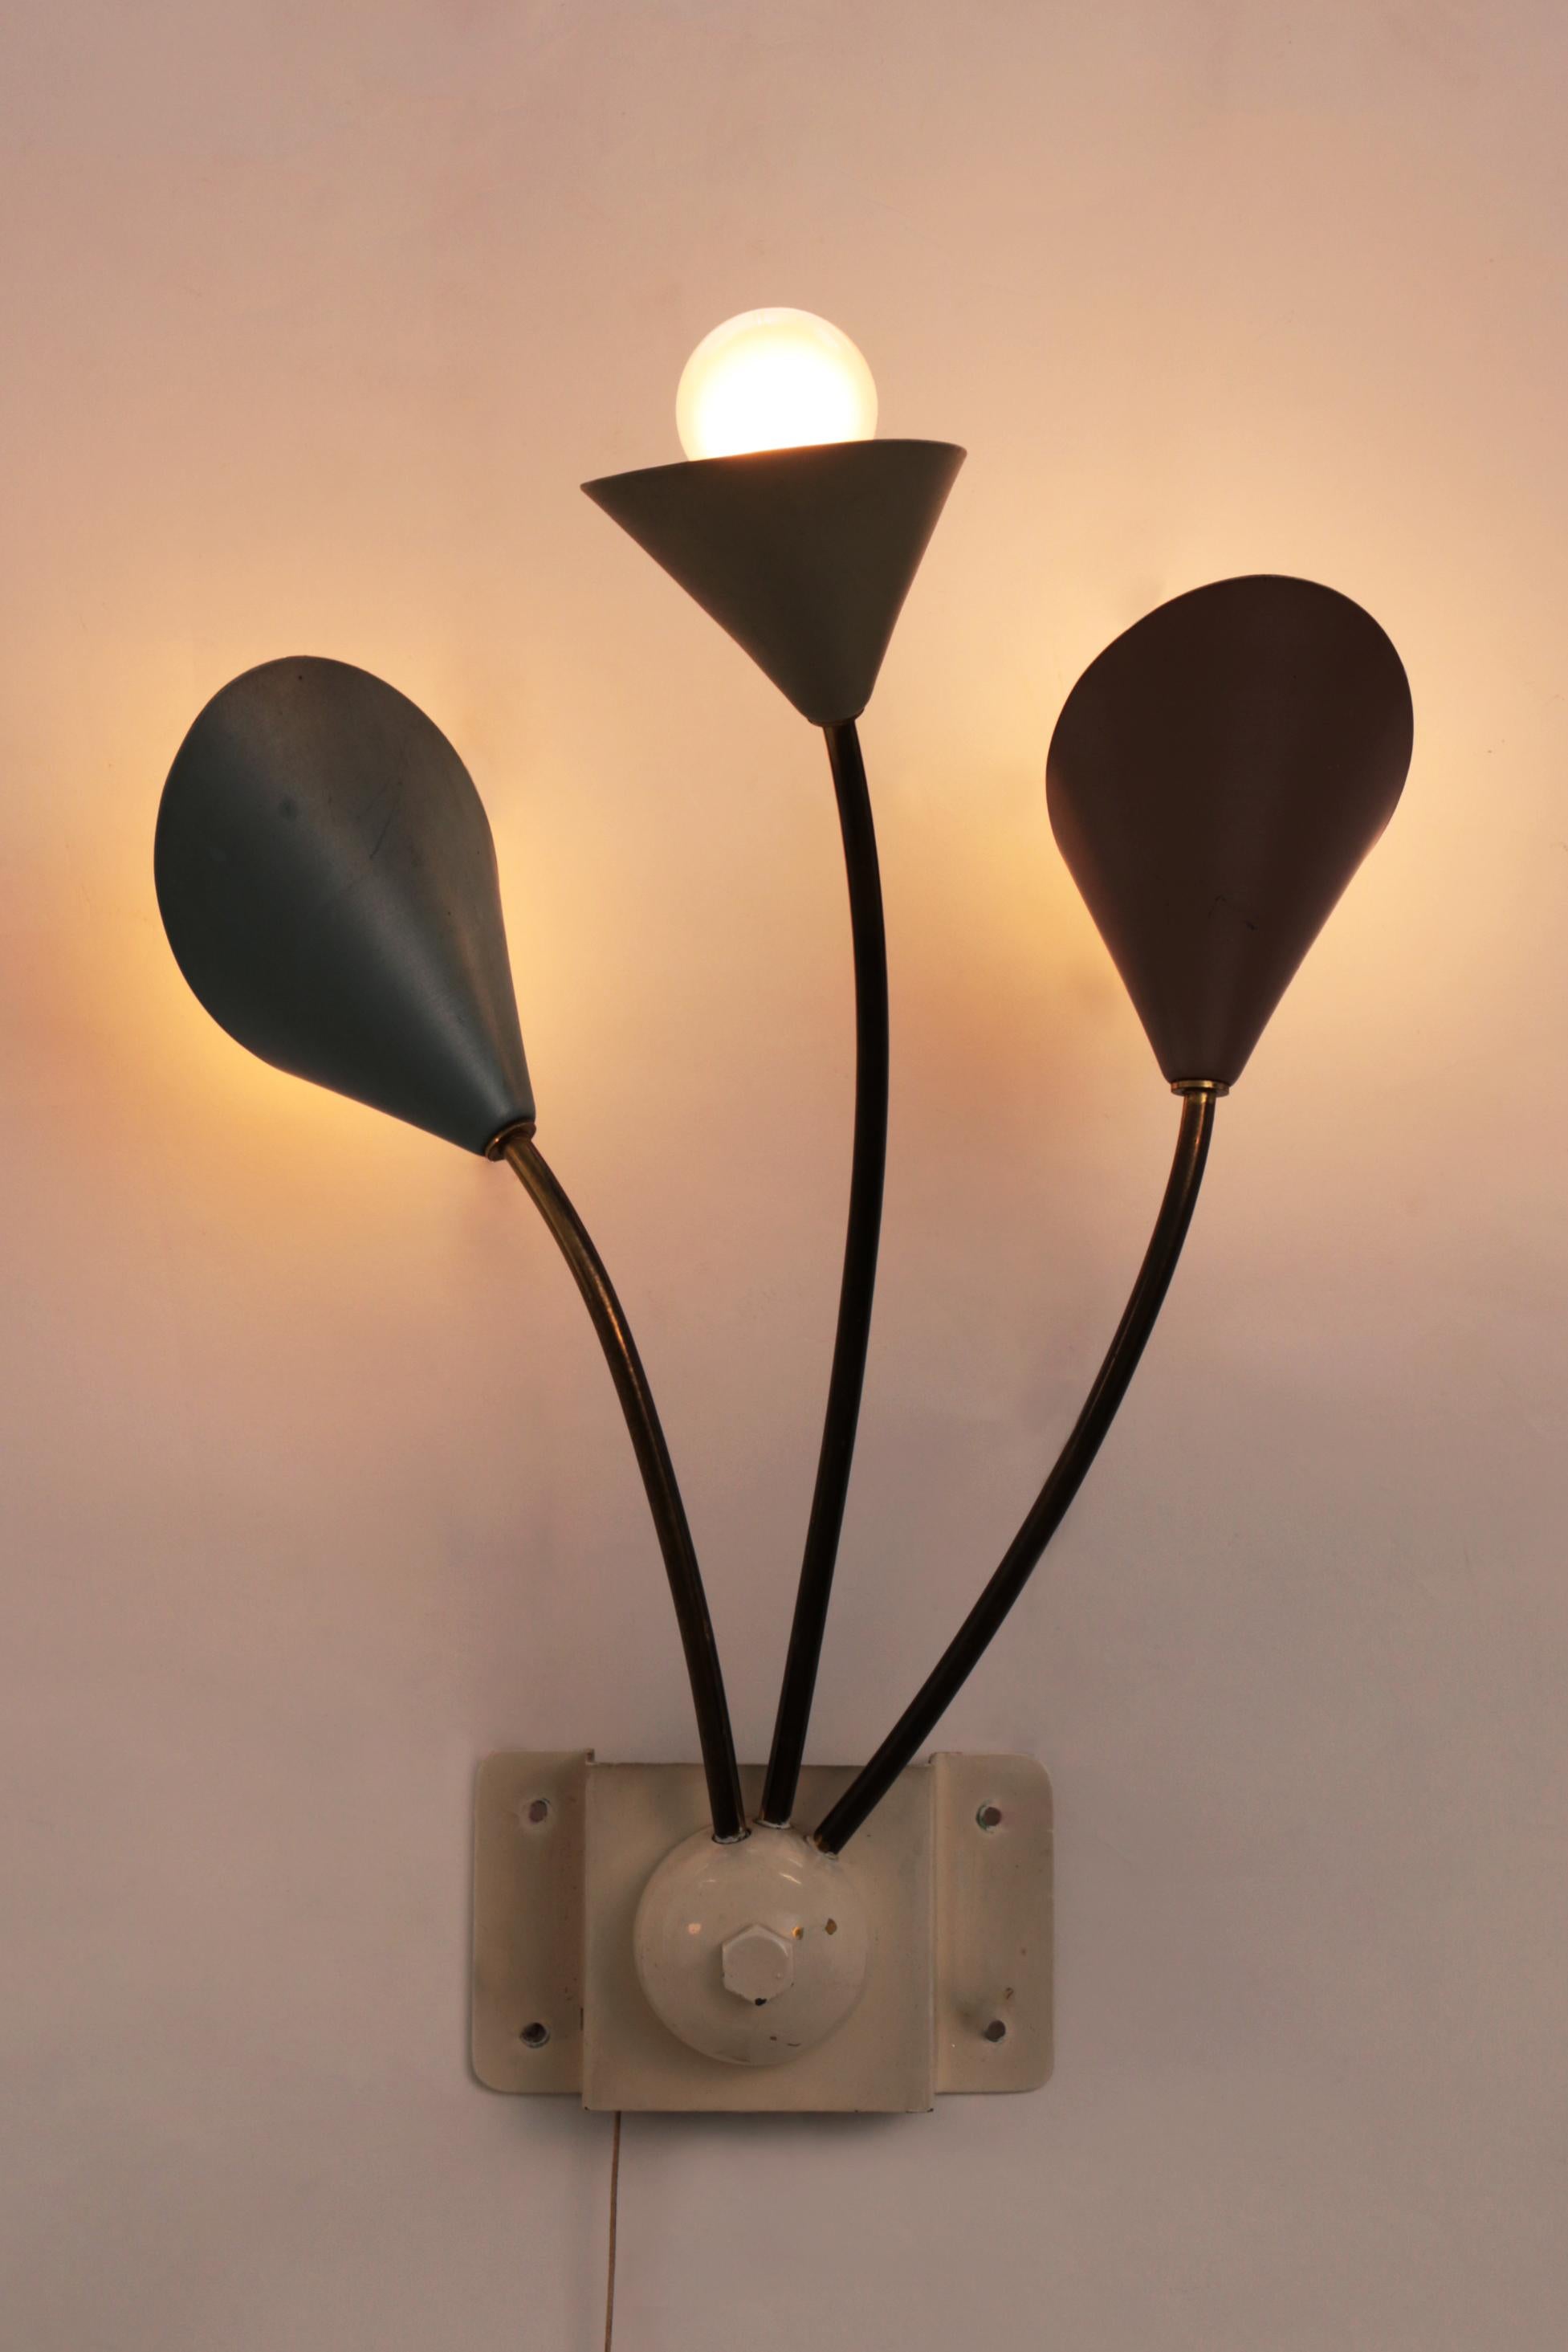 Vintage Wall Lamp with 3 Lights - Brass Metal, 1960 Denmark For Sale 1